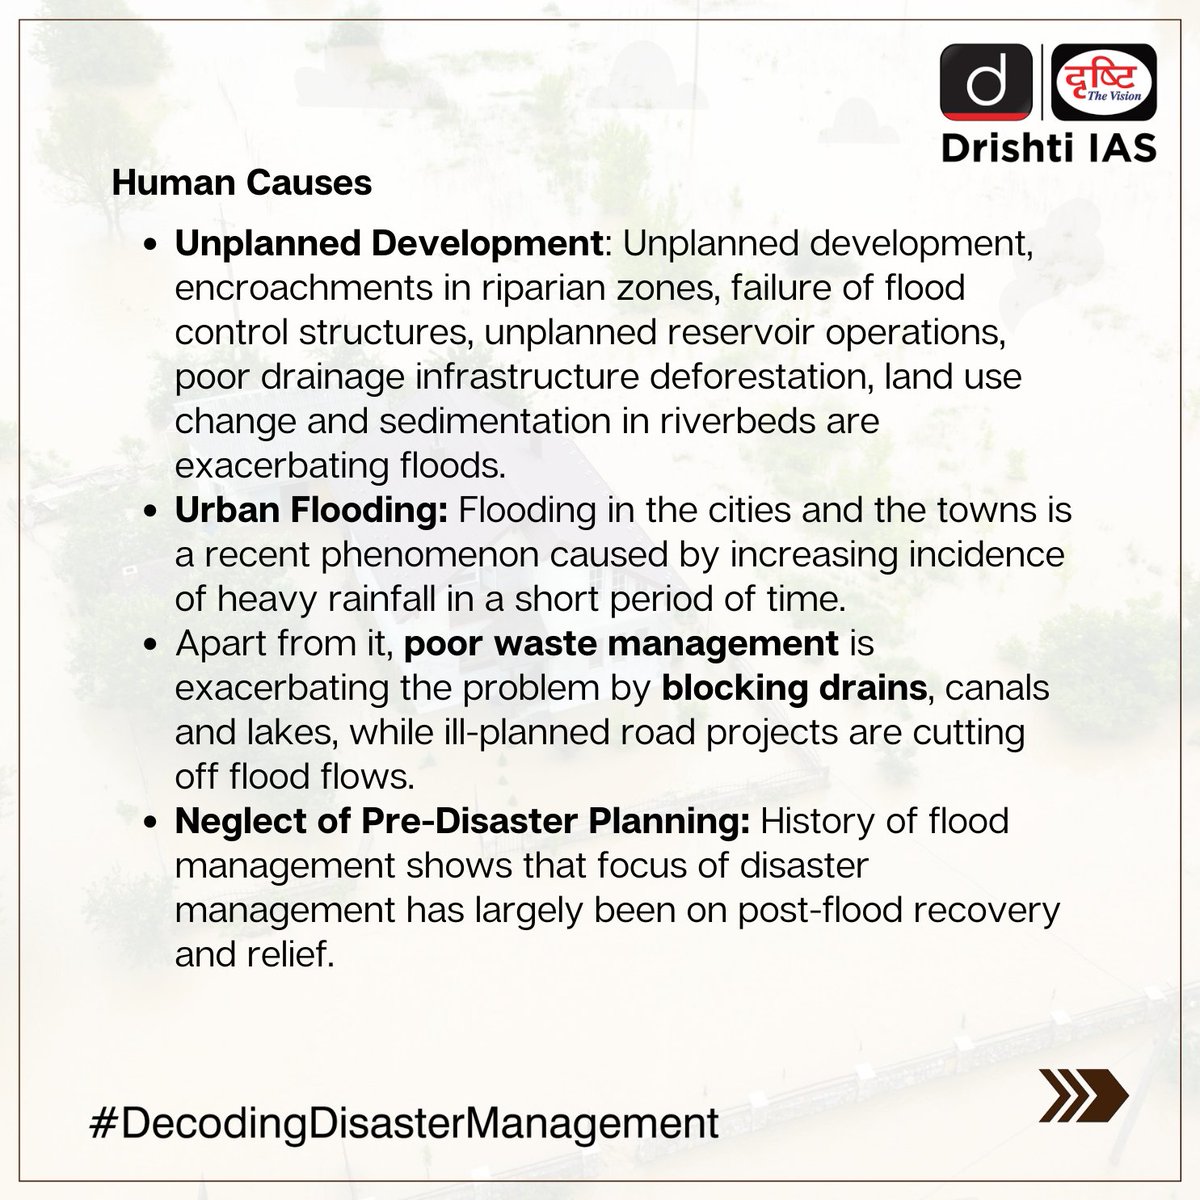 #DecodingDisasterManagement is important for the security of the community and the development of the nation. Learn more about this essential subject! 
 
#DrishtiGuideToGS #DisasterManagement #GS #Development #UPSC #IAS #CSE #PCS  #DrishtiIAS #DrishtiIASEnglish